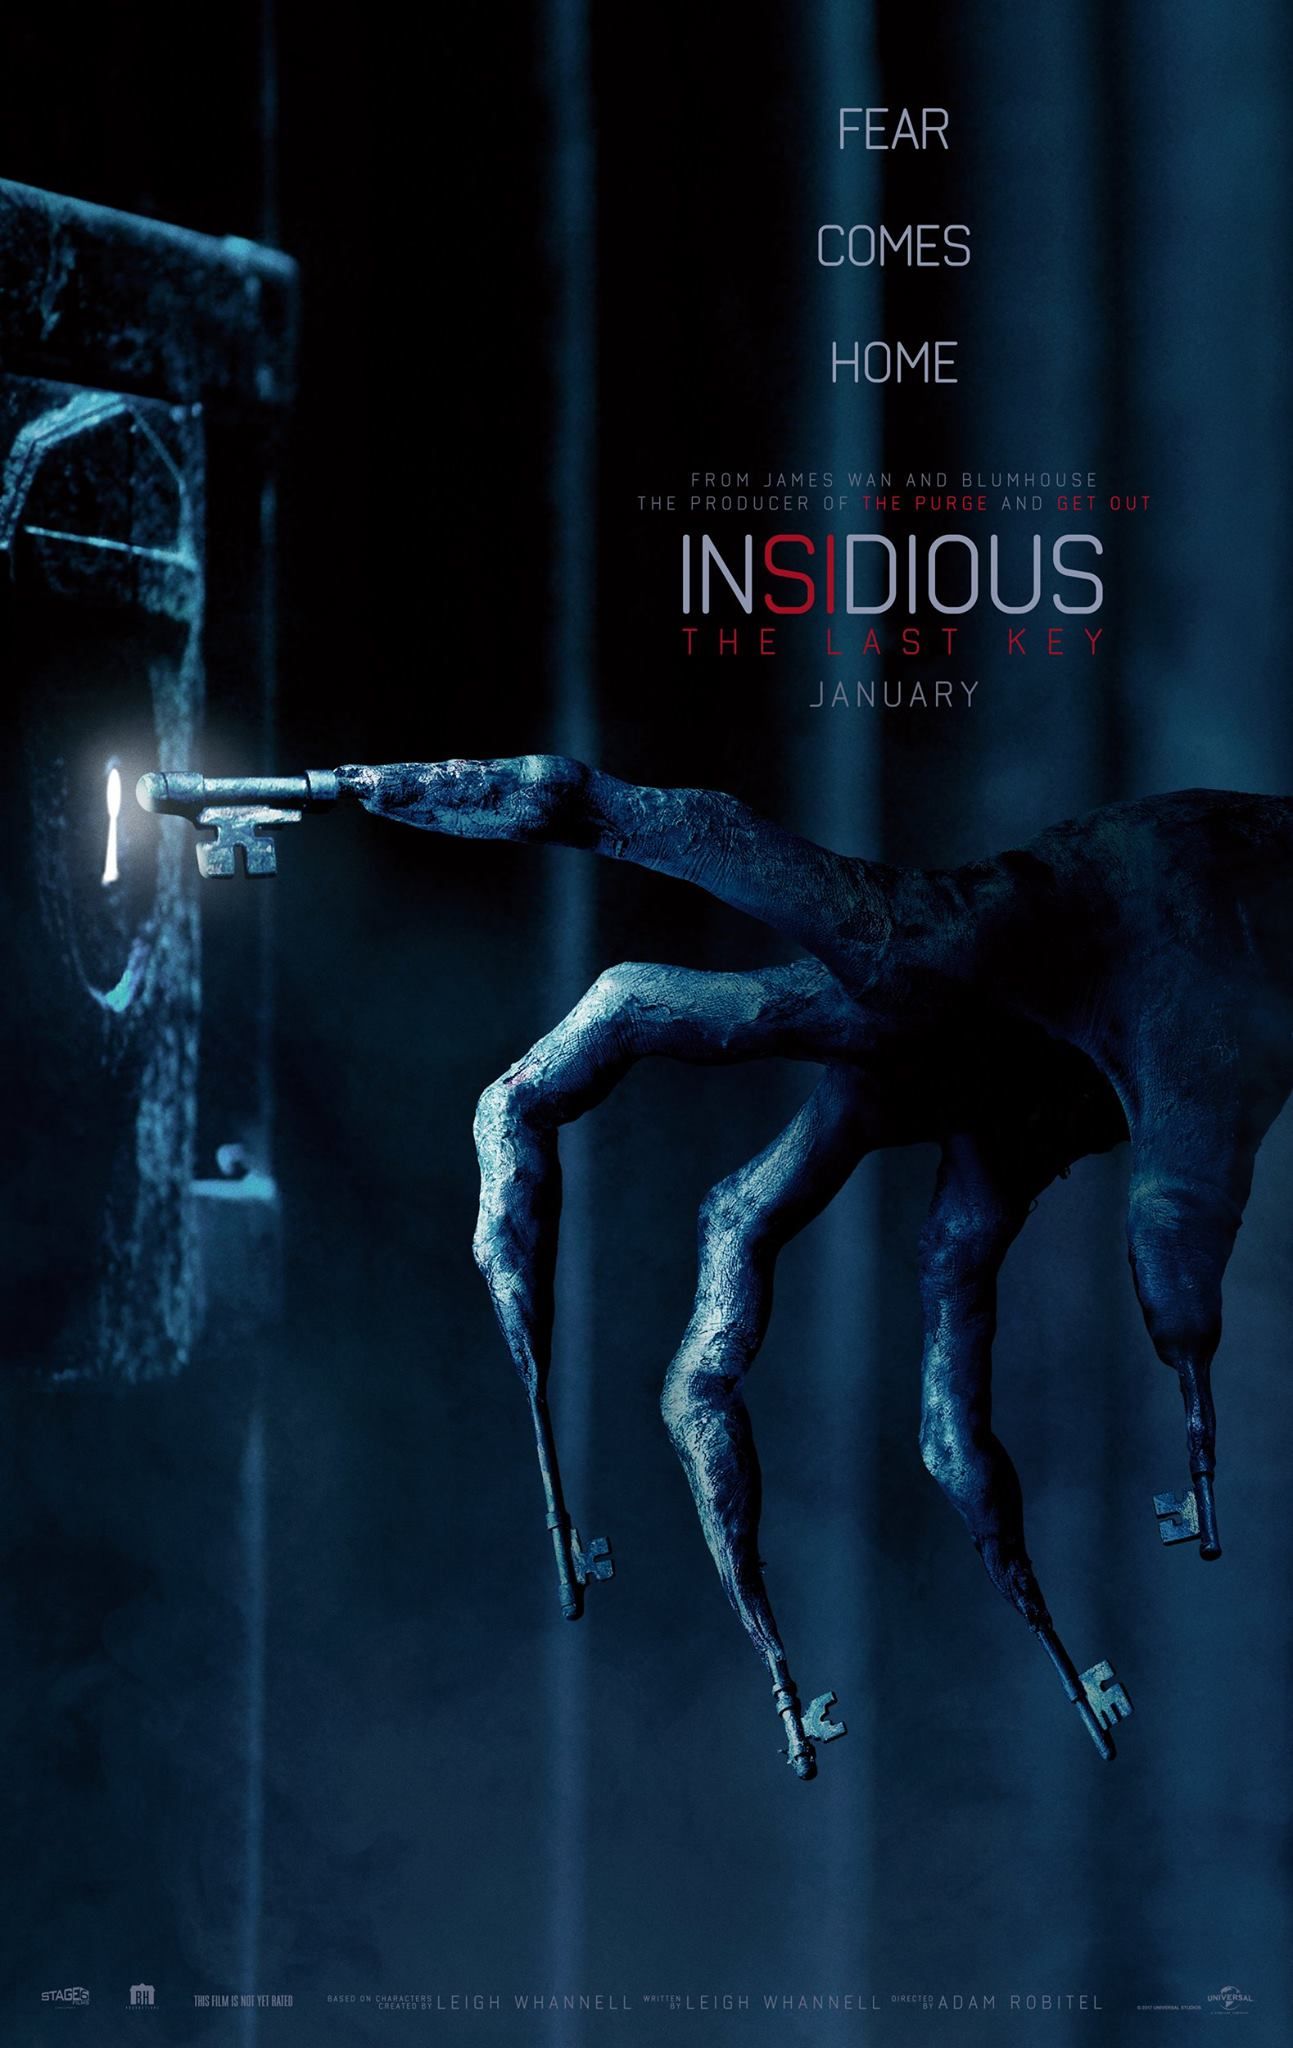 insidious chapter 3 full movie in hindi download utorrent